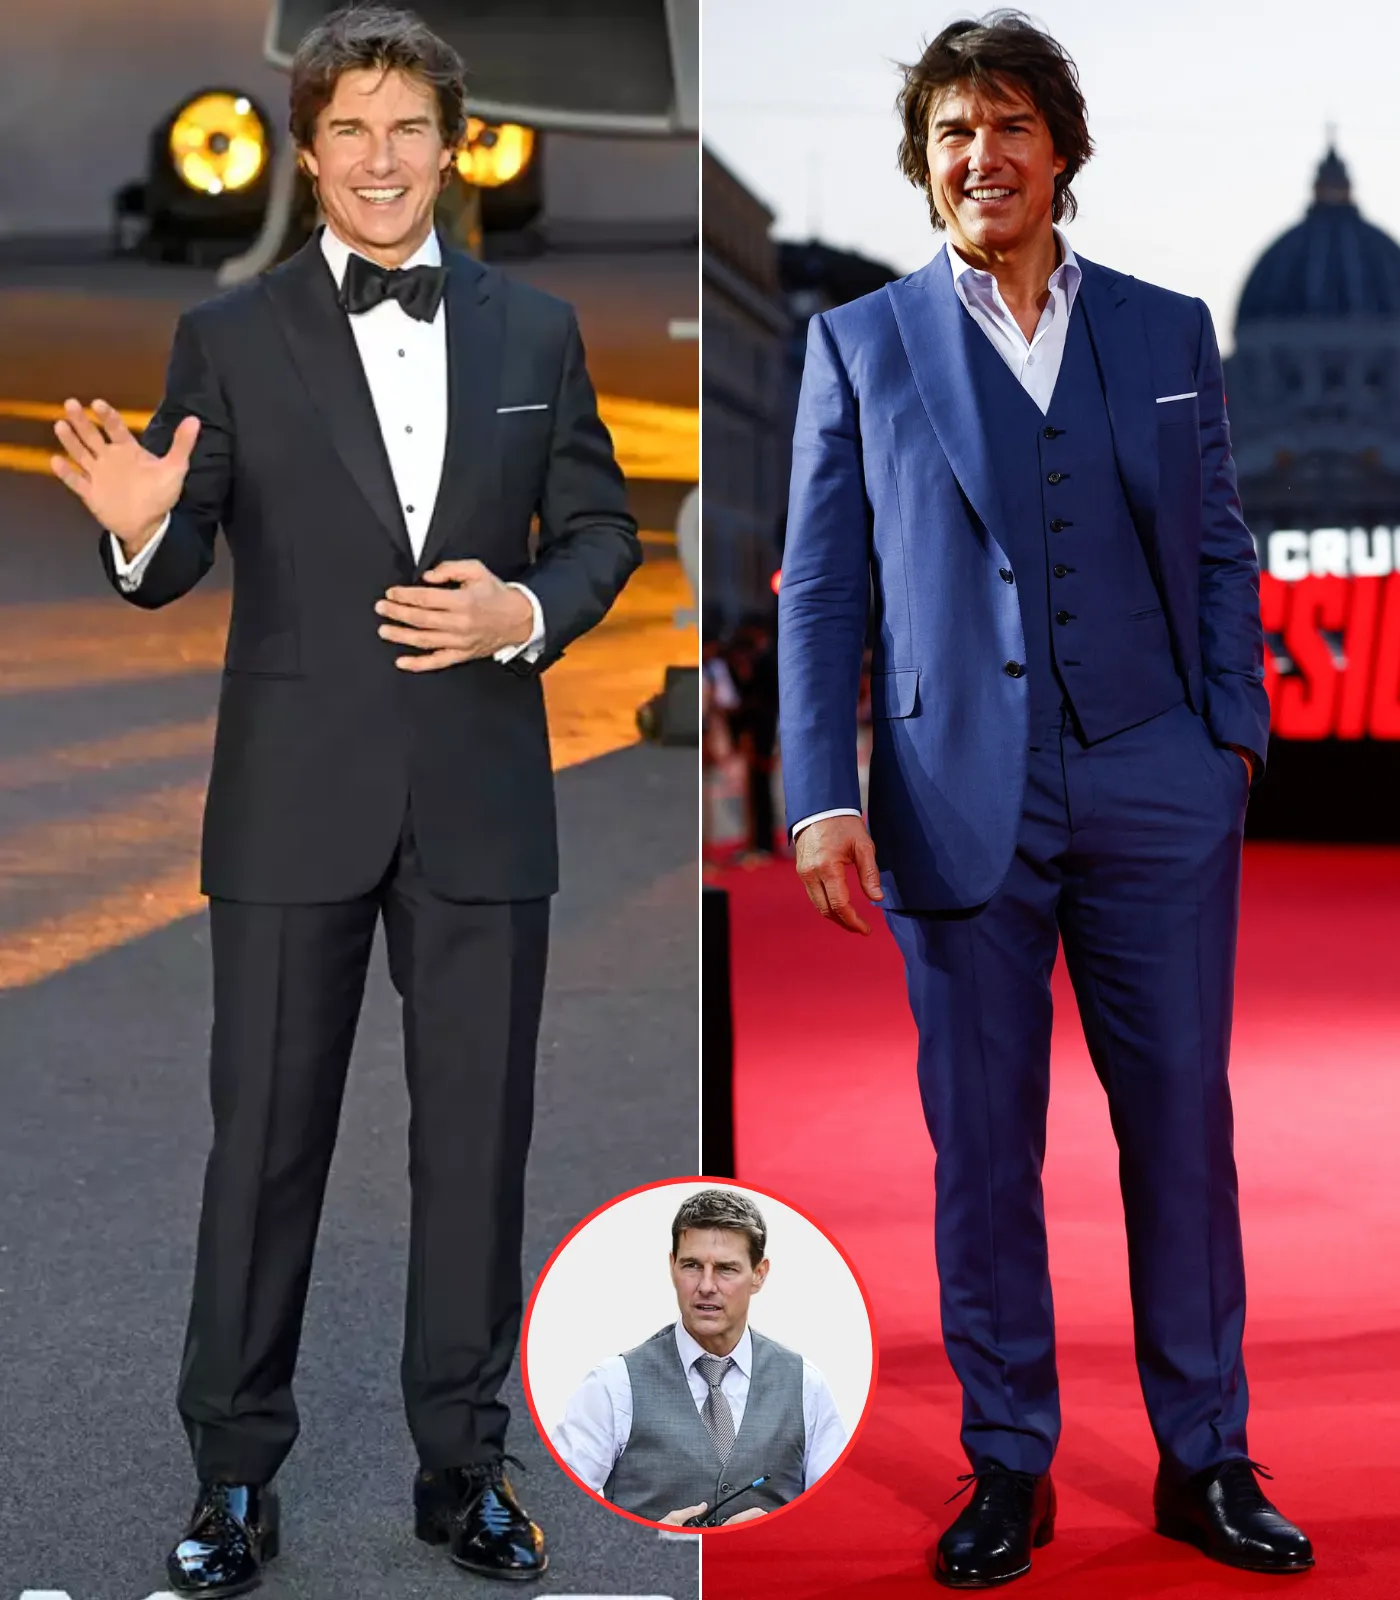 Tom Cruise, 60 years of the perfect American boy with James Bond style